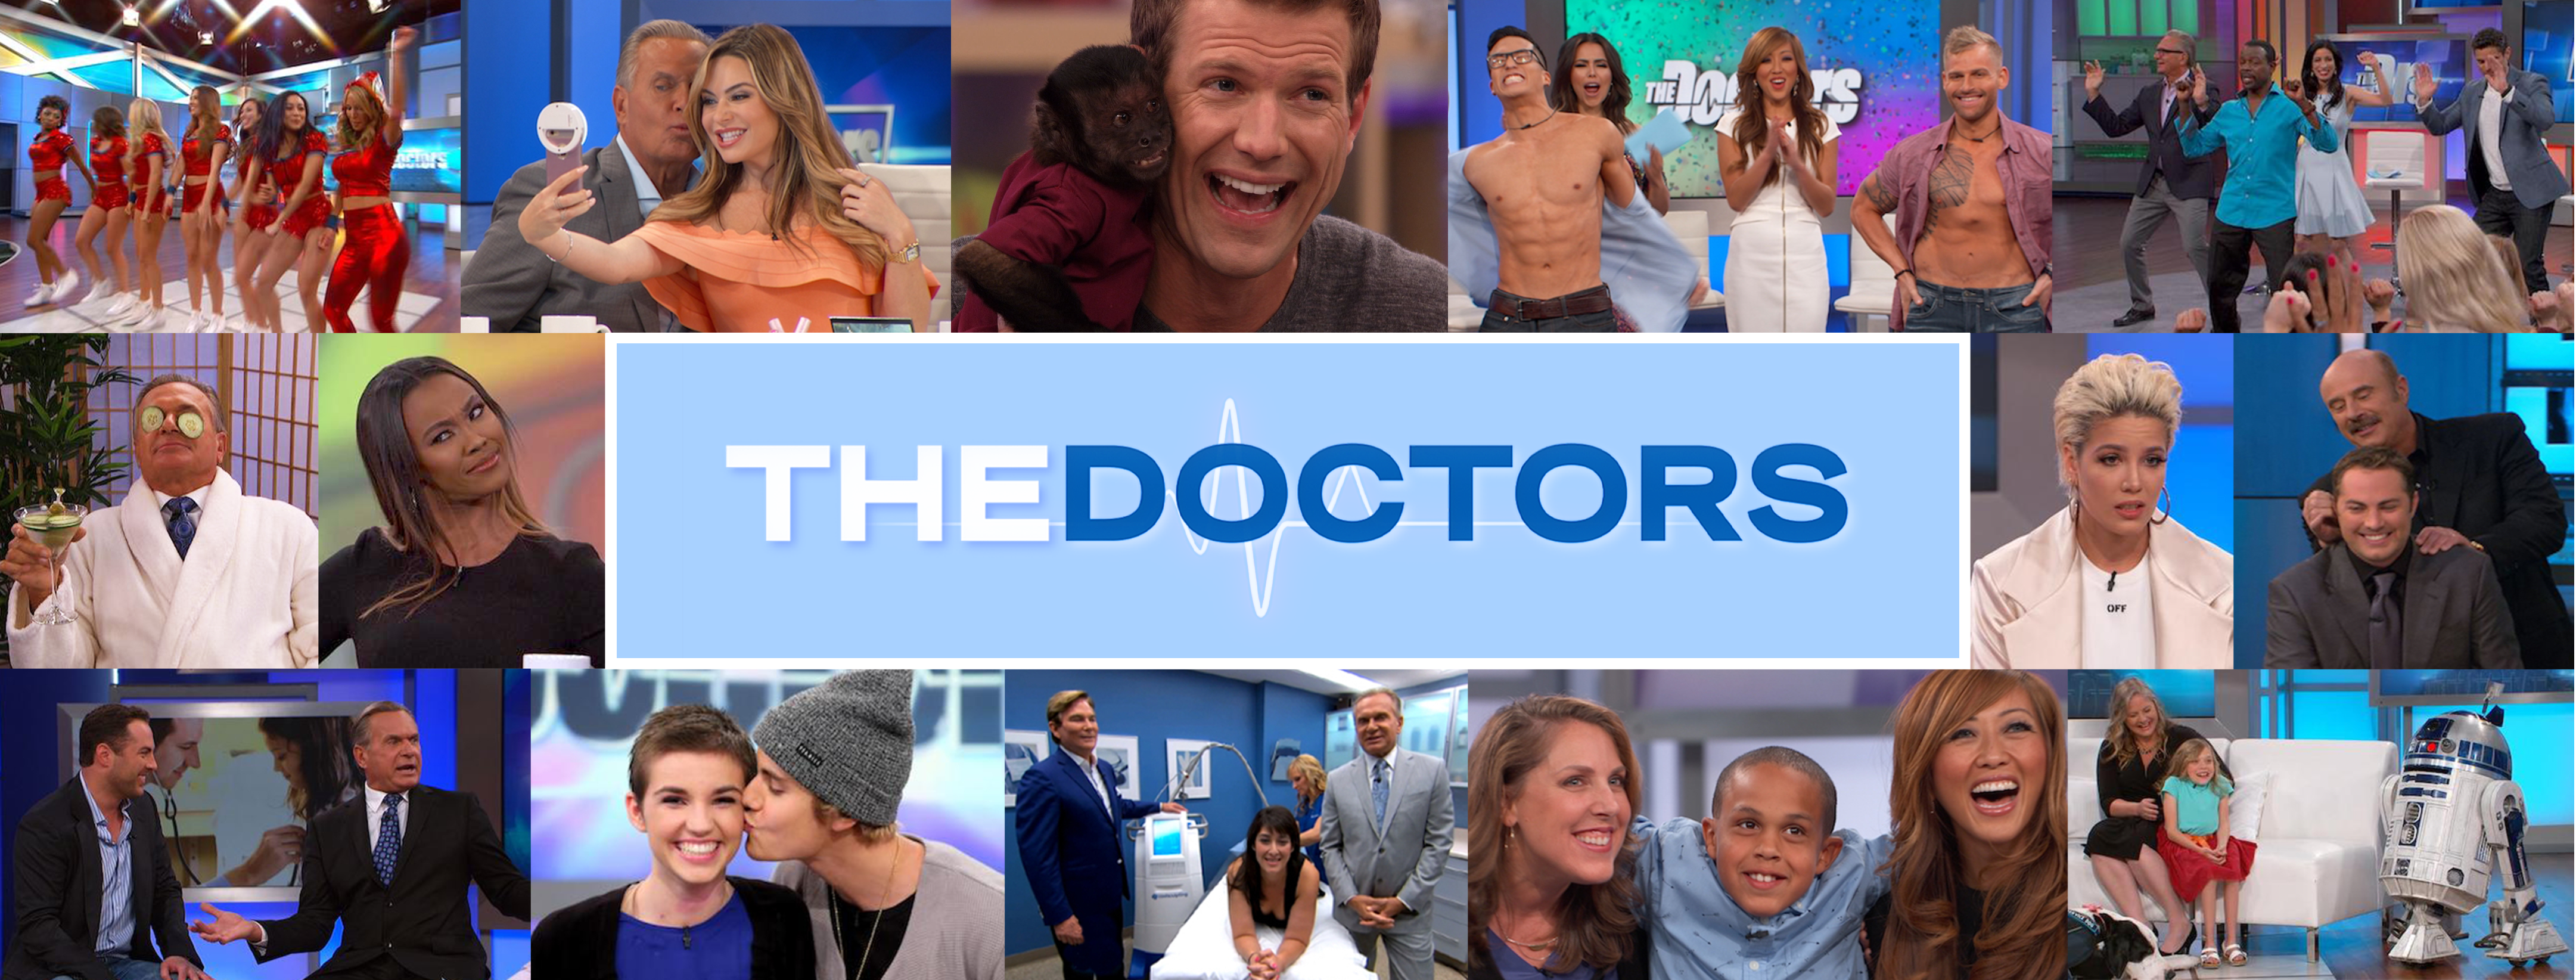 Social Media As Tool For Memory Loss The Doctors Tv Show